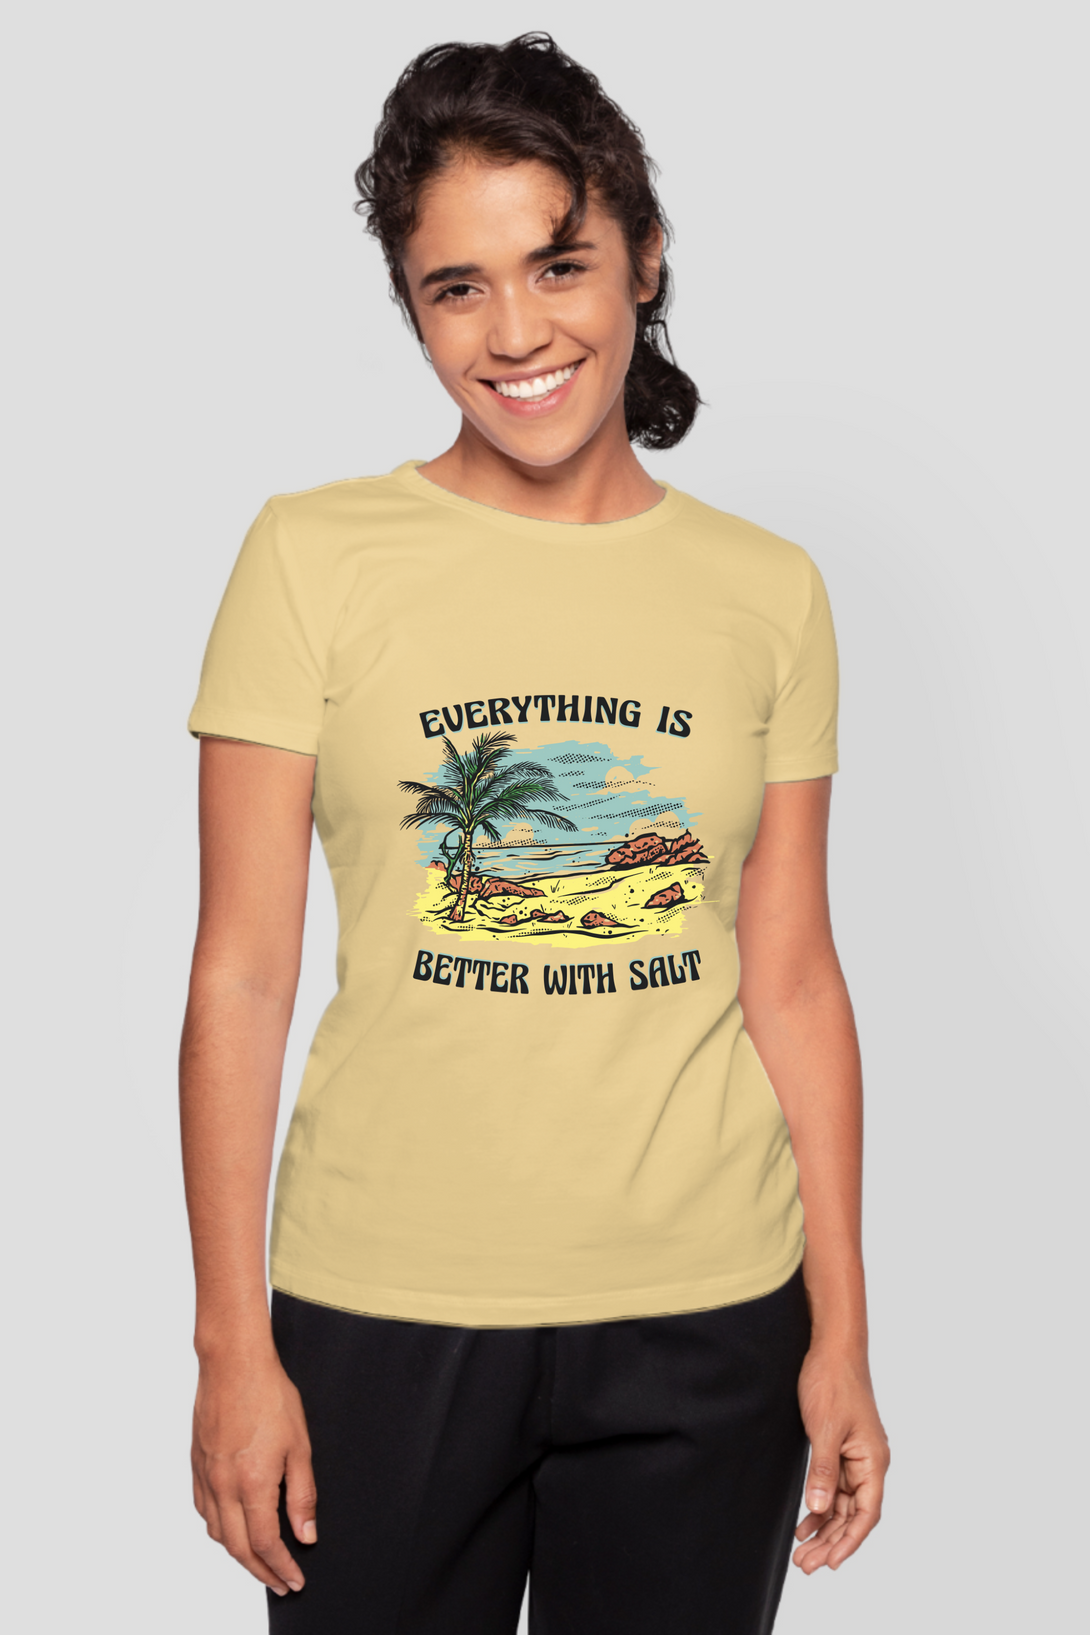 Everything Is Better With Salt Printed T-Shirt For Women - WowWaves - 12